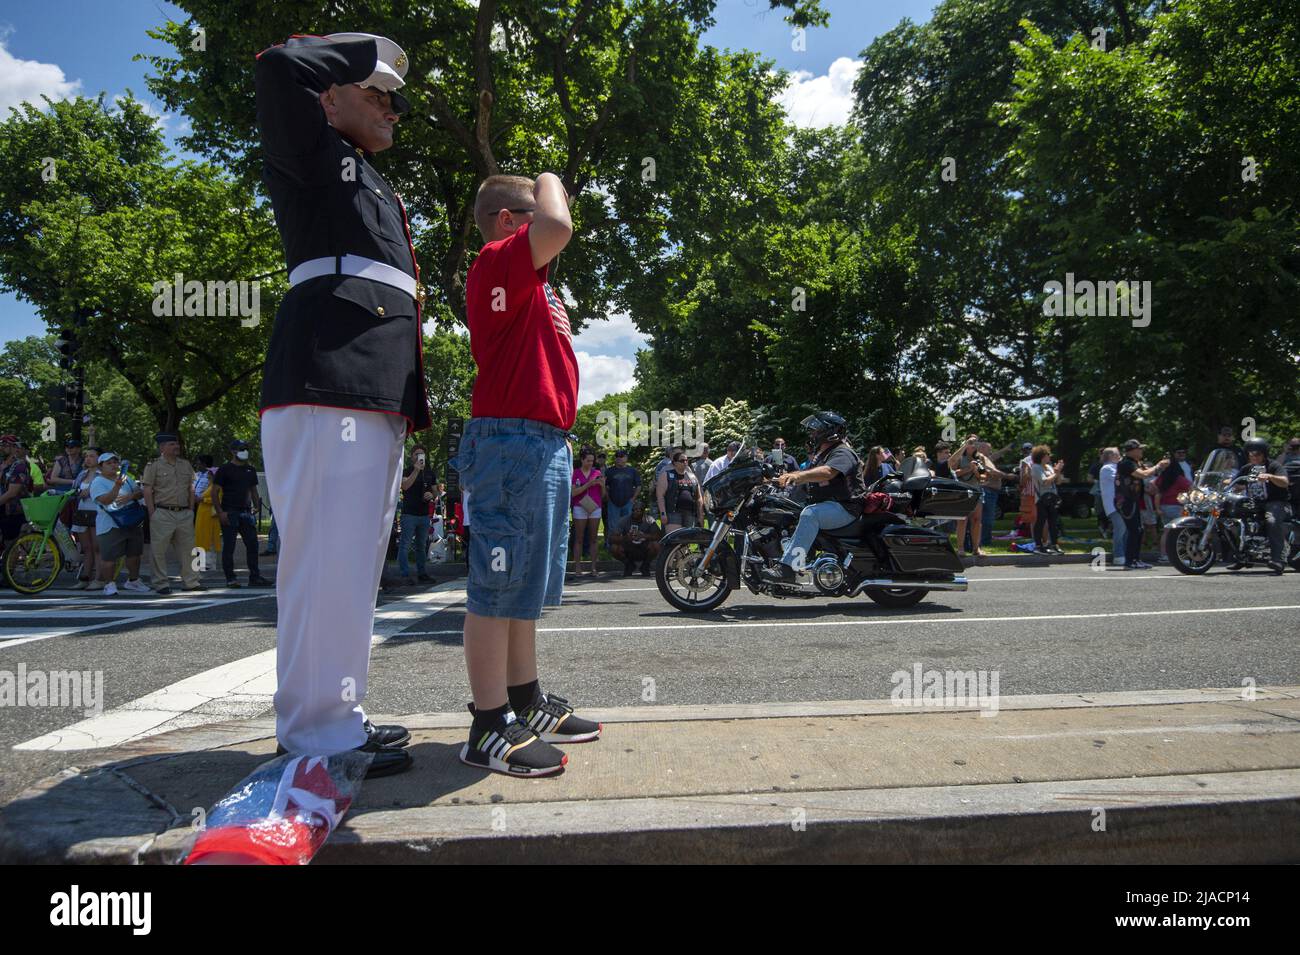 Washington, United States. 29th May, 2022. Staff Sgt. Tim Chambers, known as 'The Saluting Marine', is joined by a boy in saluting the thousands of motorcyclists participating in 'Rolling Thunder,' a demonstration to bring awareness to prisoners of war and military members missing in action, as they ride past the Lincoln Memorial in Washington, DC on Sunday, May 29, 2022. Photo by Bonnie Cash/UPI Credit: UPI/Alamy Live News Stock Photo